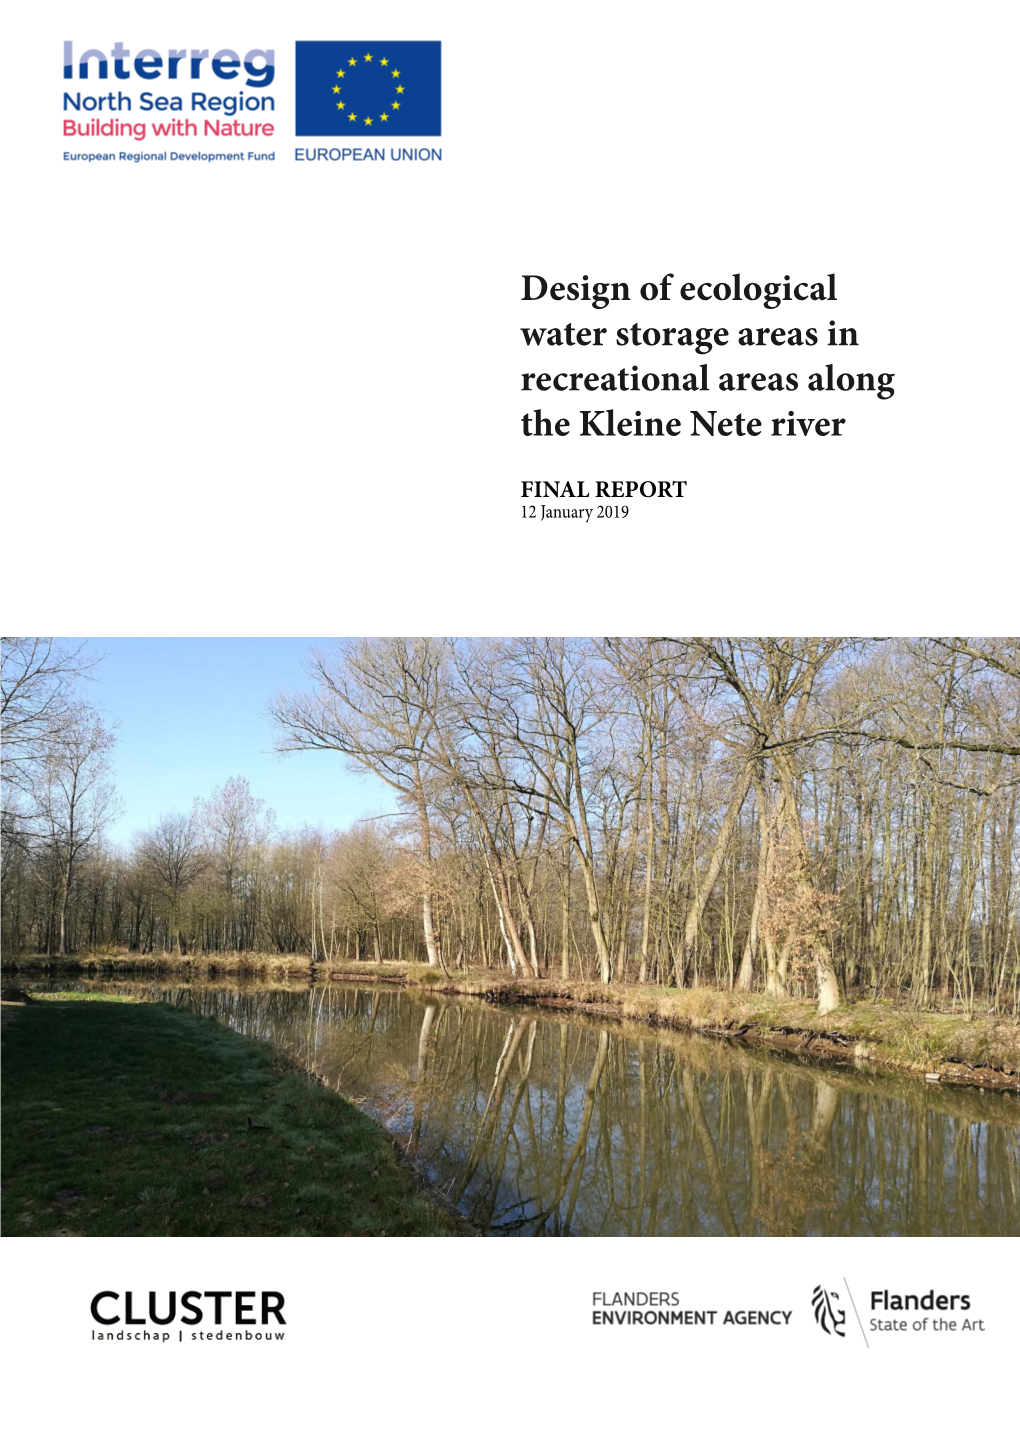 Design of Ecological Water Storage Areas in Recreational Areas Along the Kleine Nete River